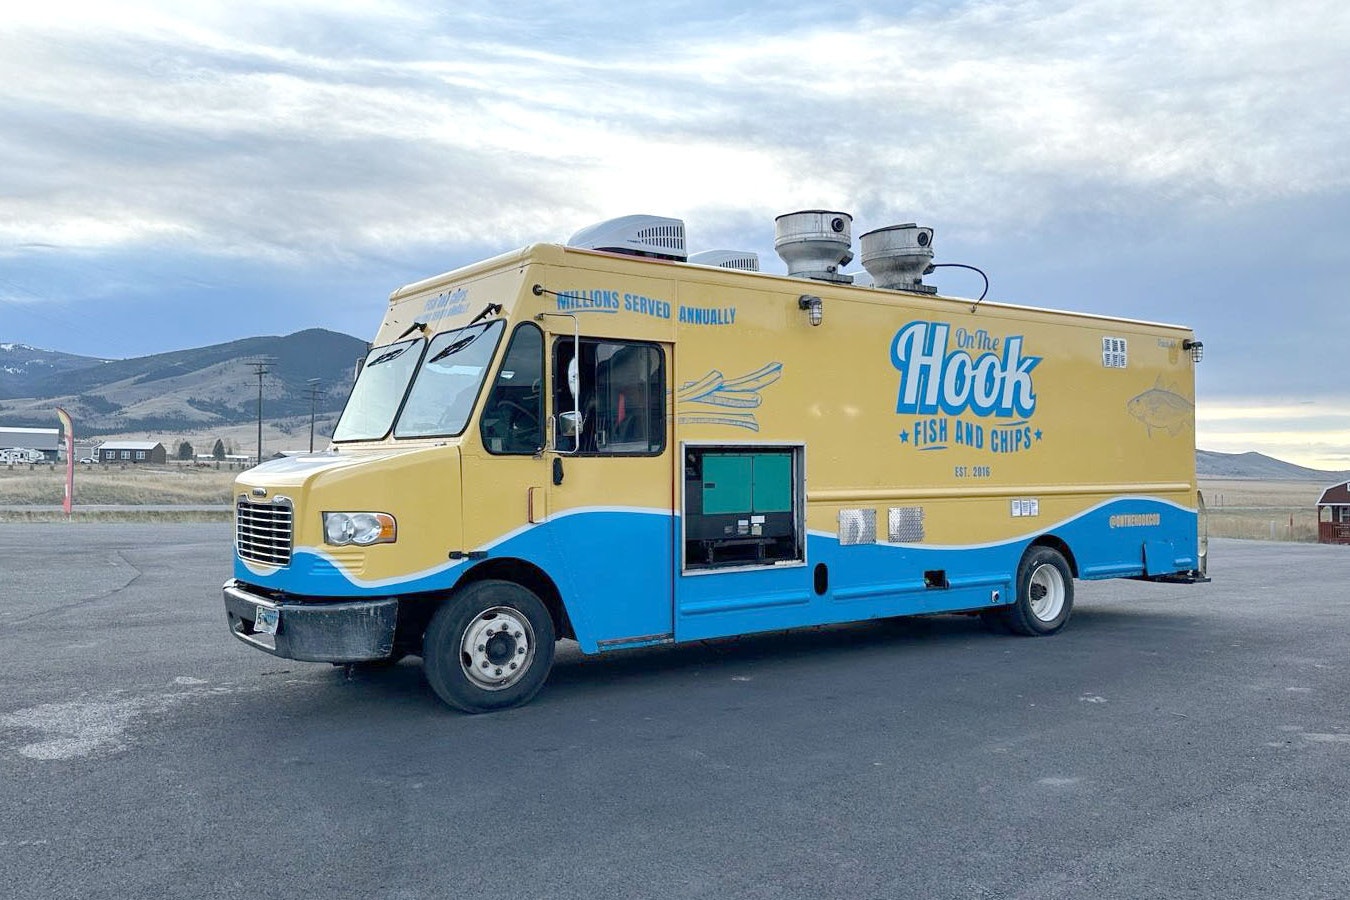 The new look On the Hook Fish and Chips truck.